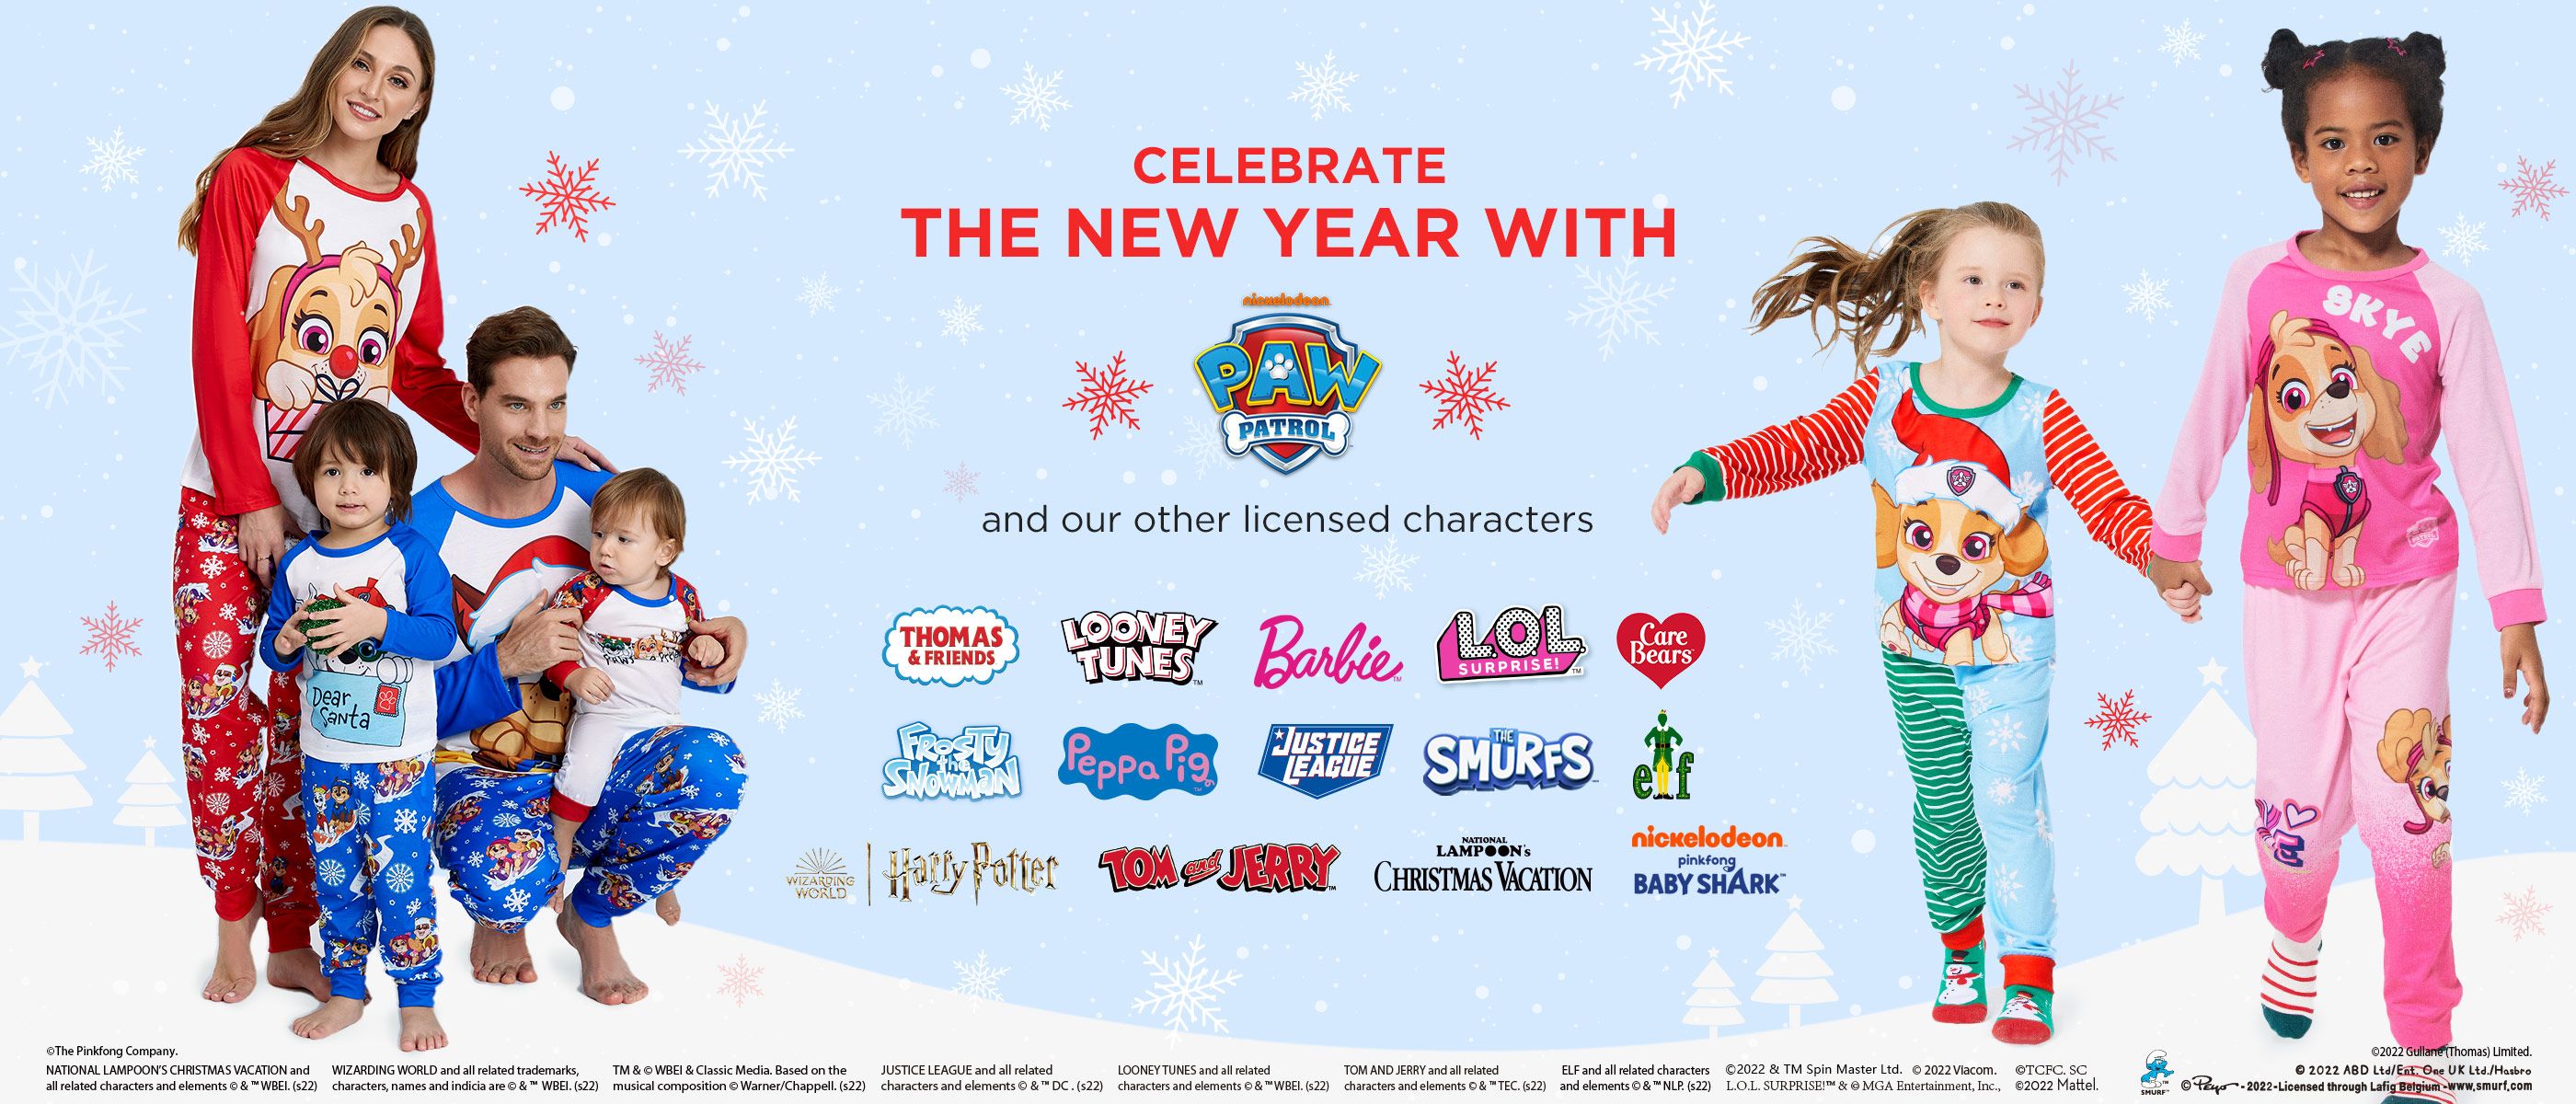 Celebrate the new year with PAW Patrol